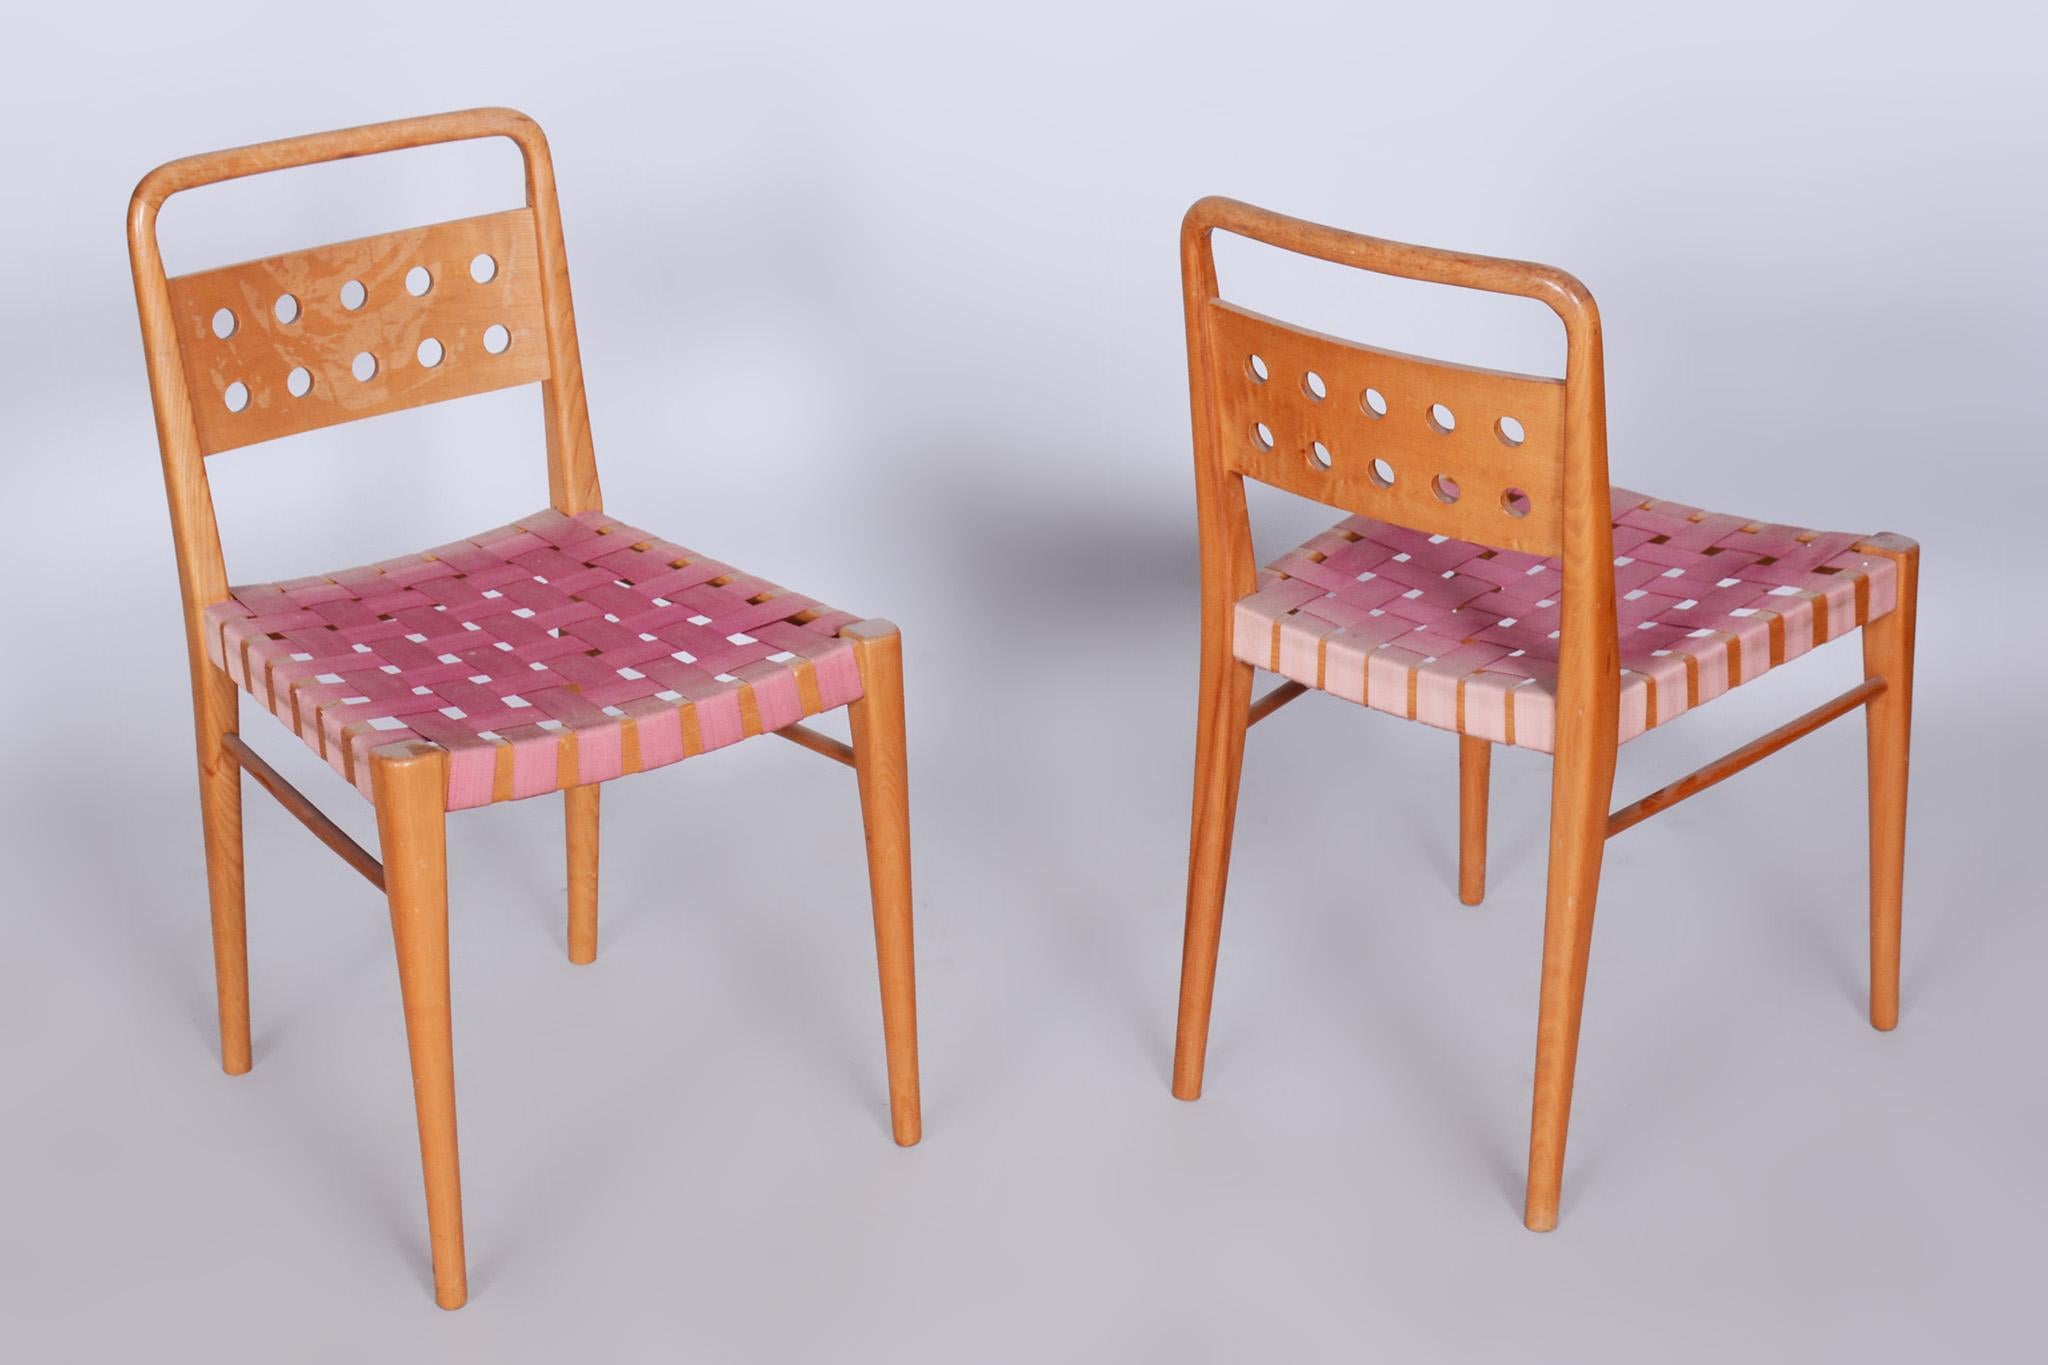 Fabric Set of Four Midcentury Ash Dining Chairs, Original Condition, Czechia, 1950s For Sale